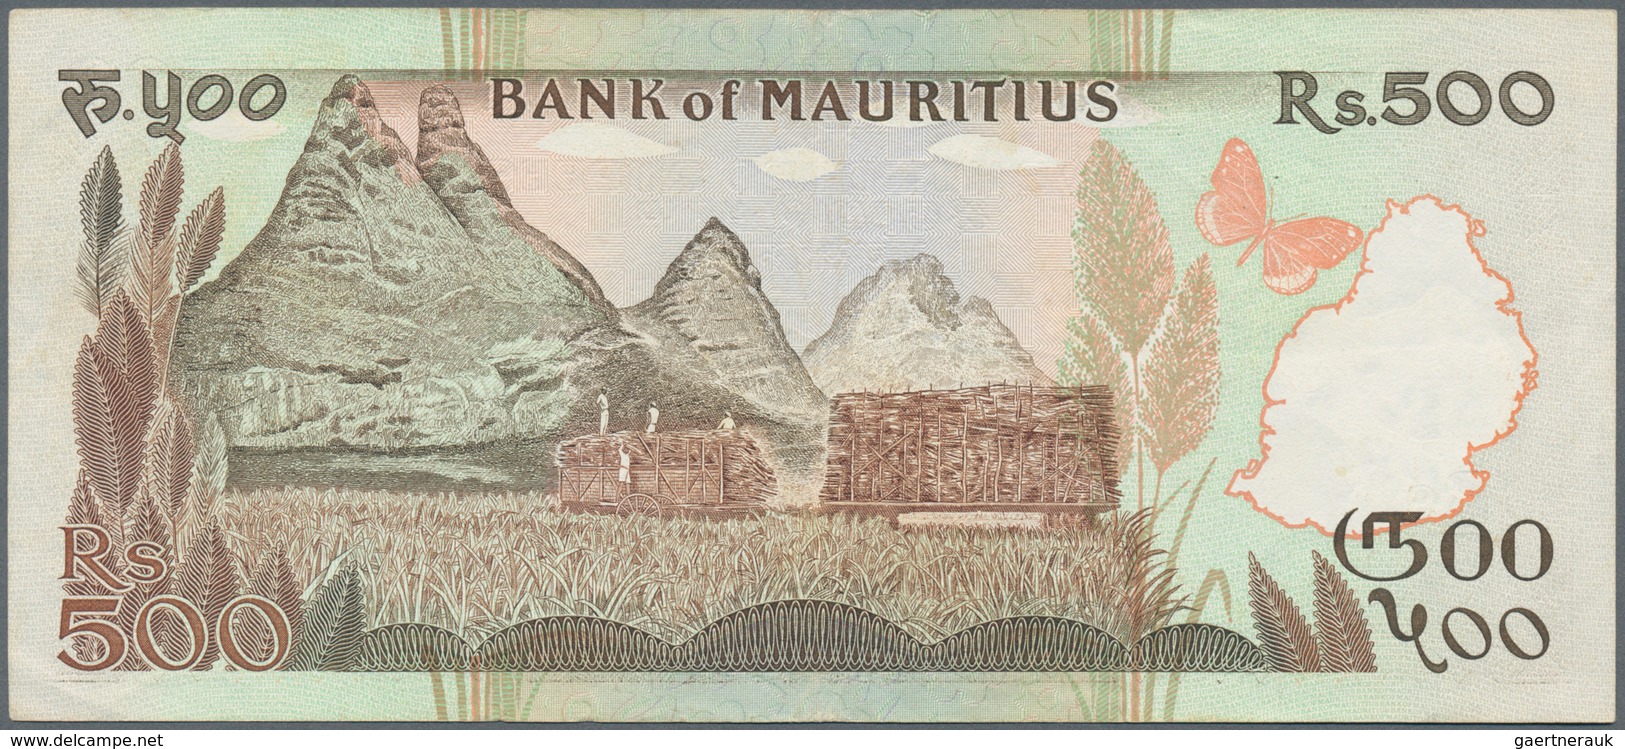 Mauritius: Pair With 500 Rupees ND(1988) P.40b (VF+) And 200 Rupees ND(1985) P.39 (UNC). (2 Pcs.) - Mauritius